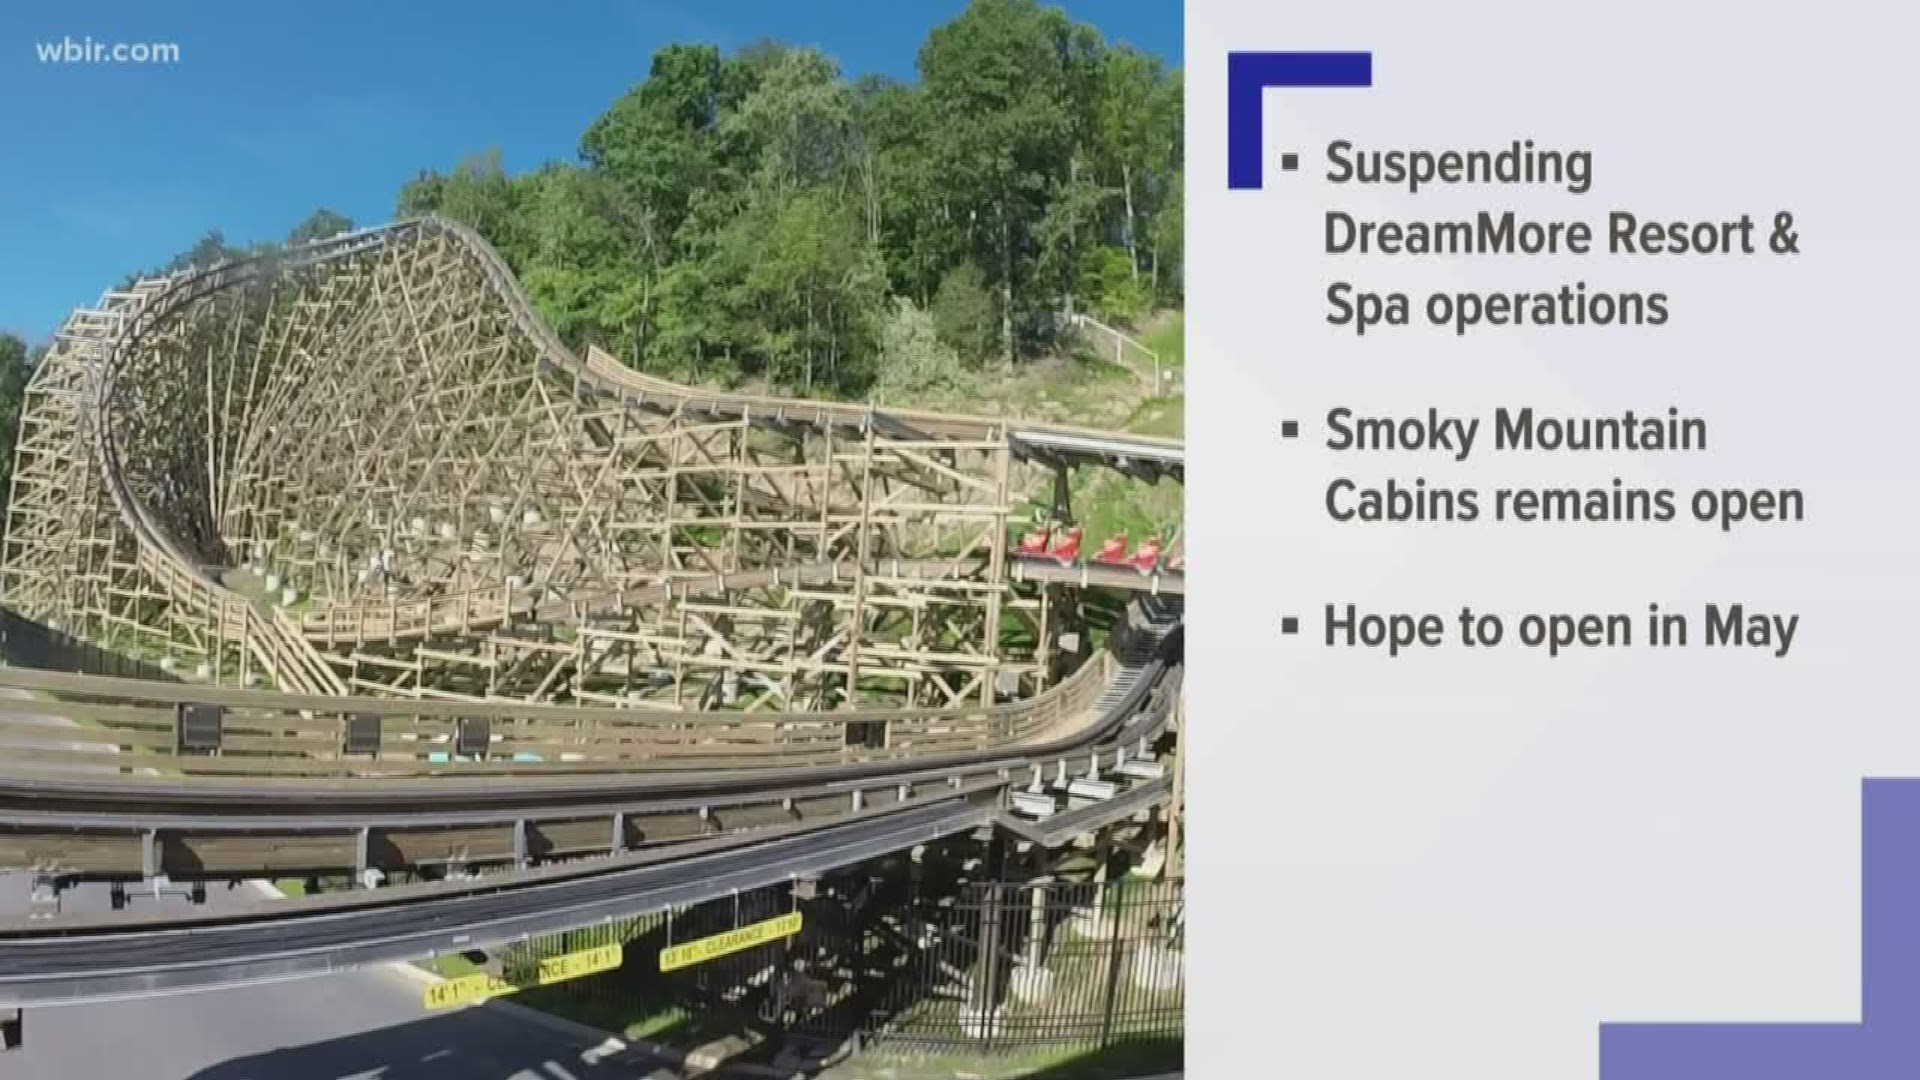 It's also suspending operations at the DreamMore Resort and Spa starting Tuesday.